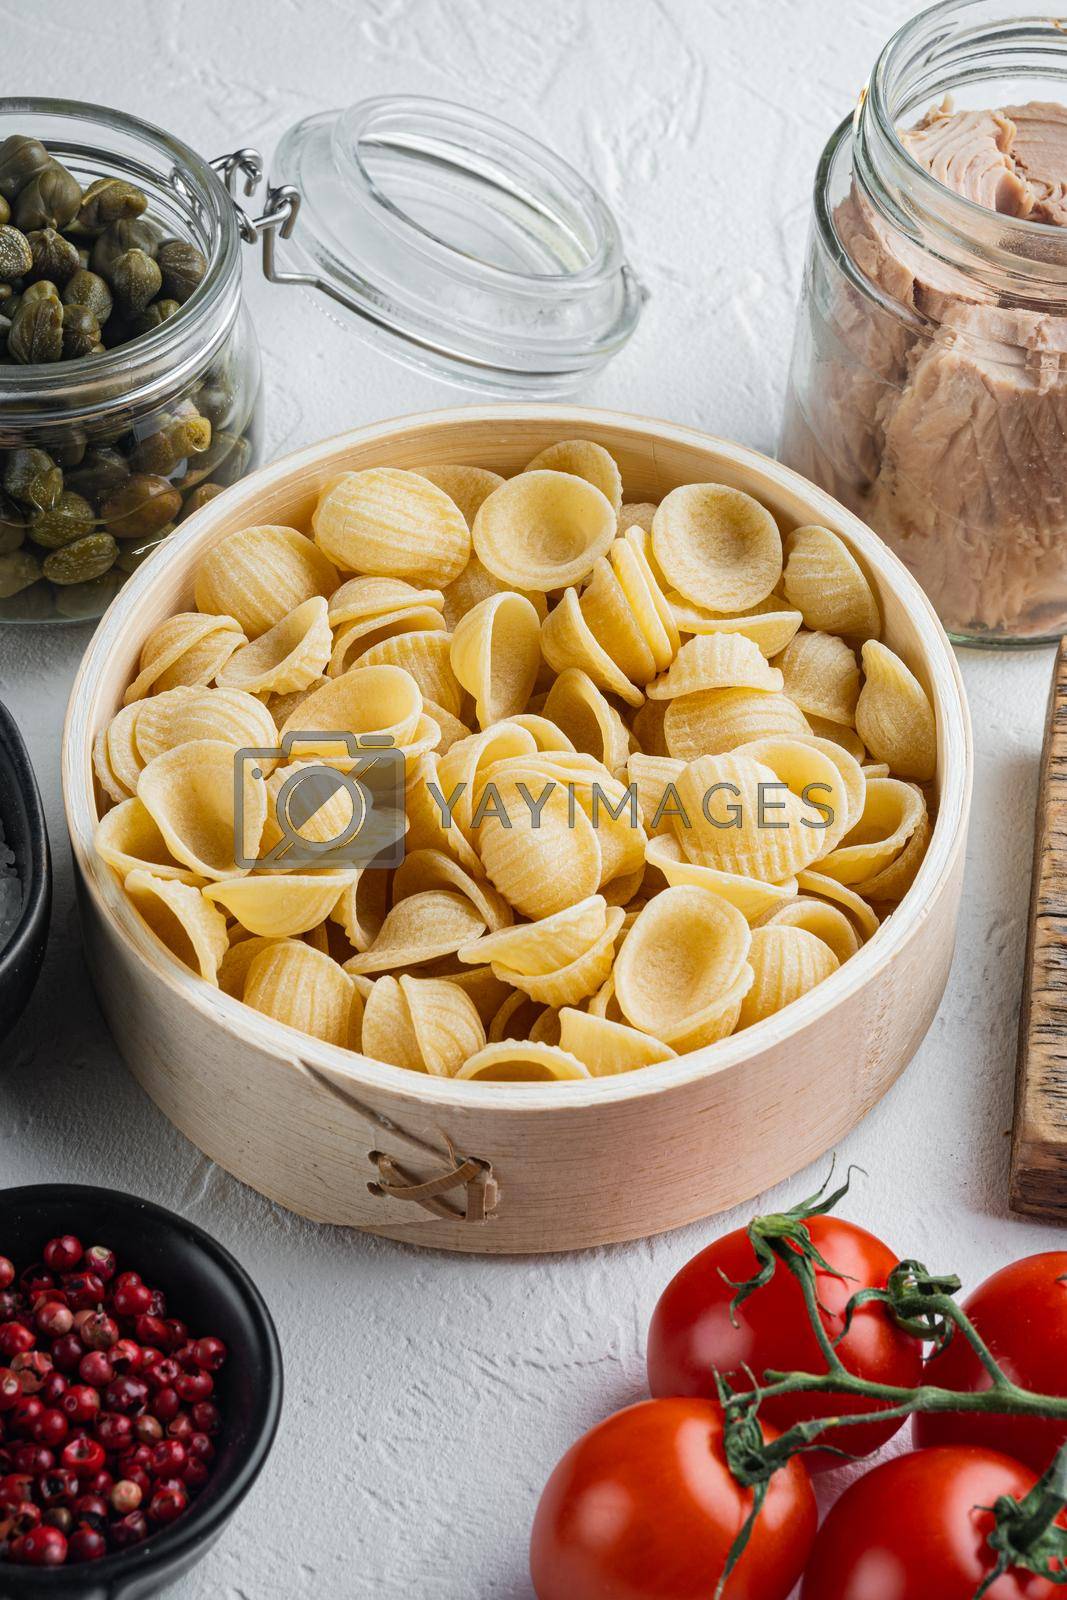 Royalty free image of Tuna pasta shells ingredients, on white background by Ilianesolenyi